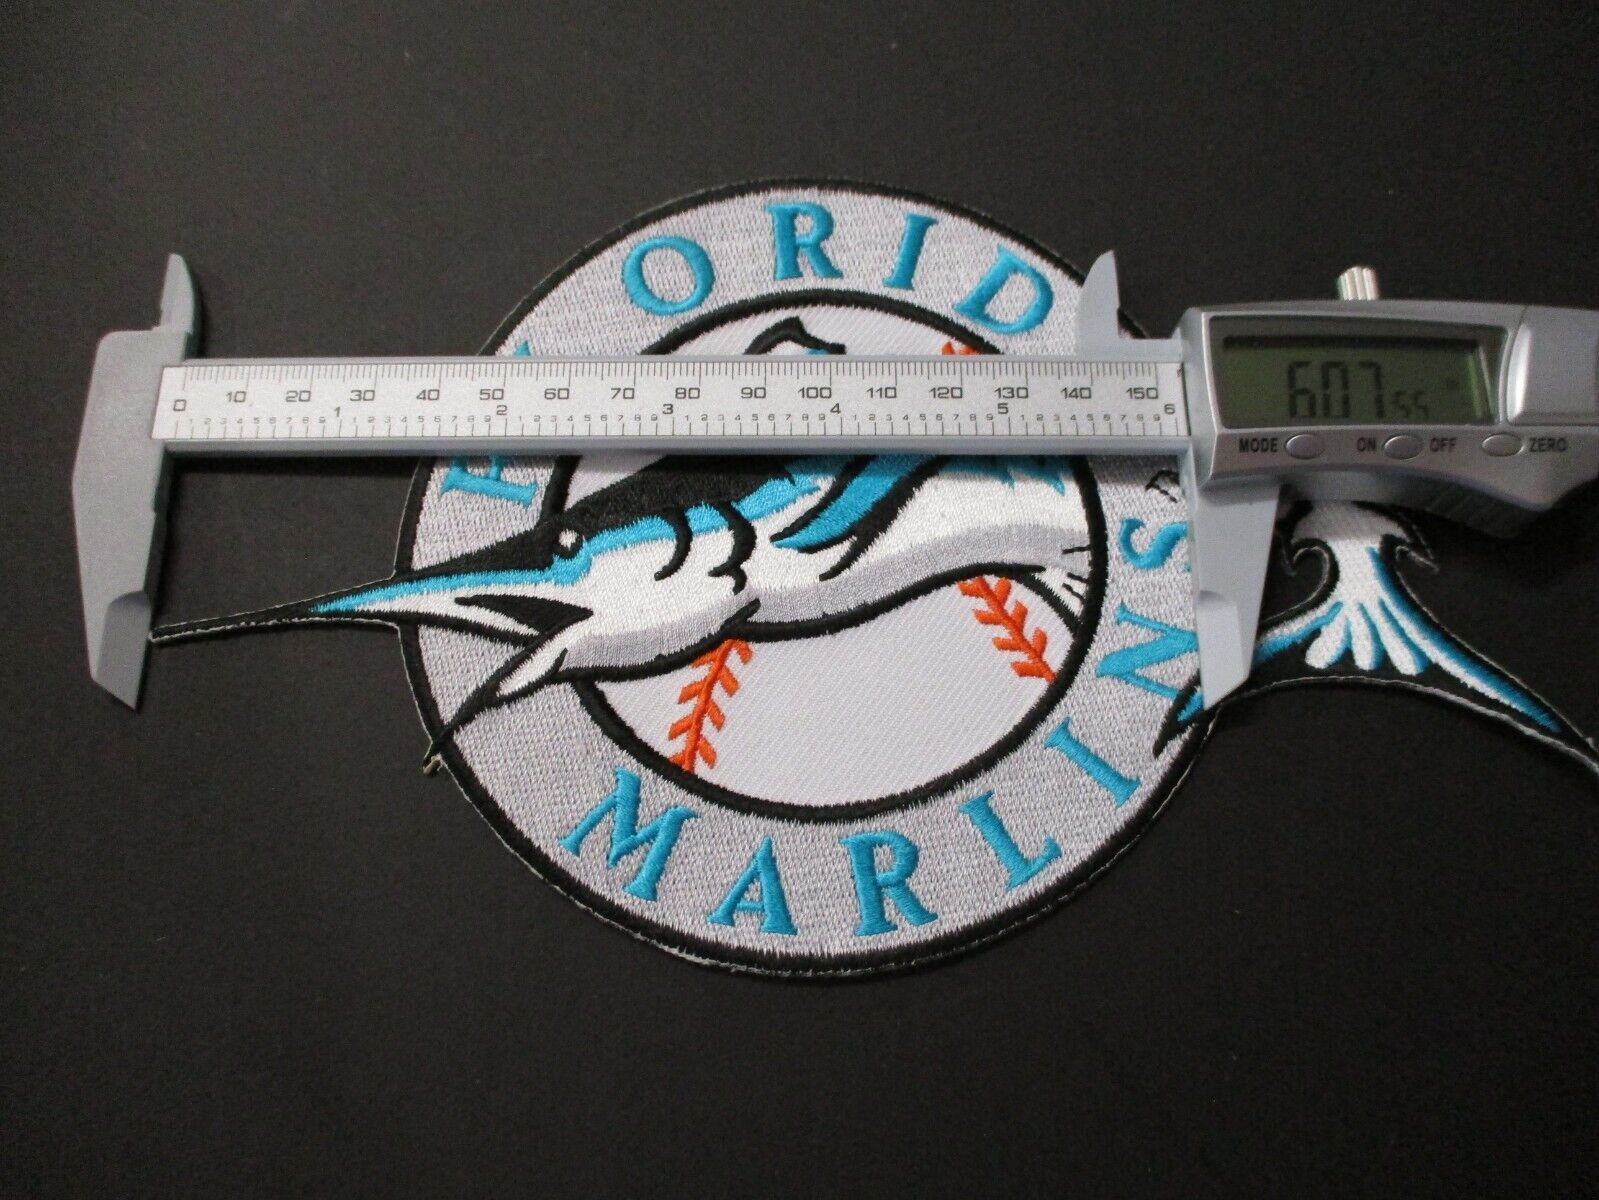 Florida Marlins Big Patch Size 5 x 7.5 Inches Teal Silver Orange White